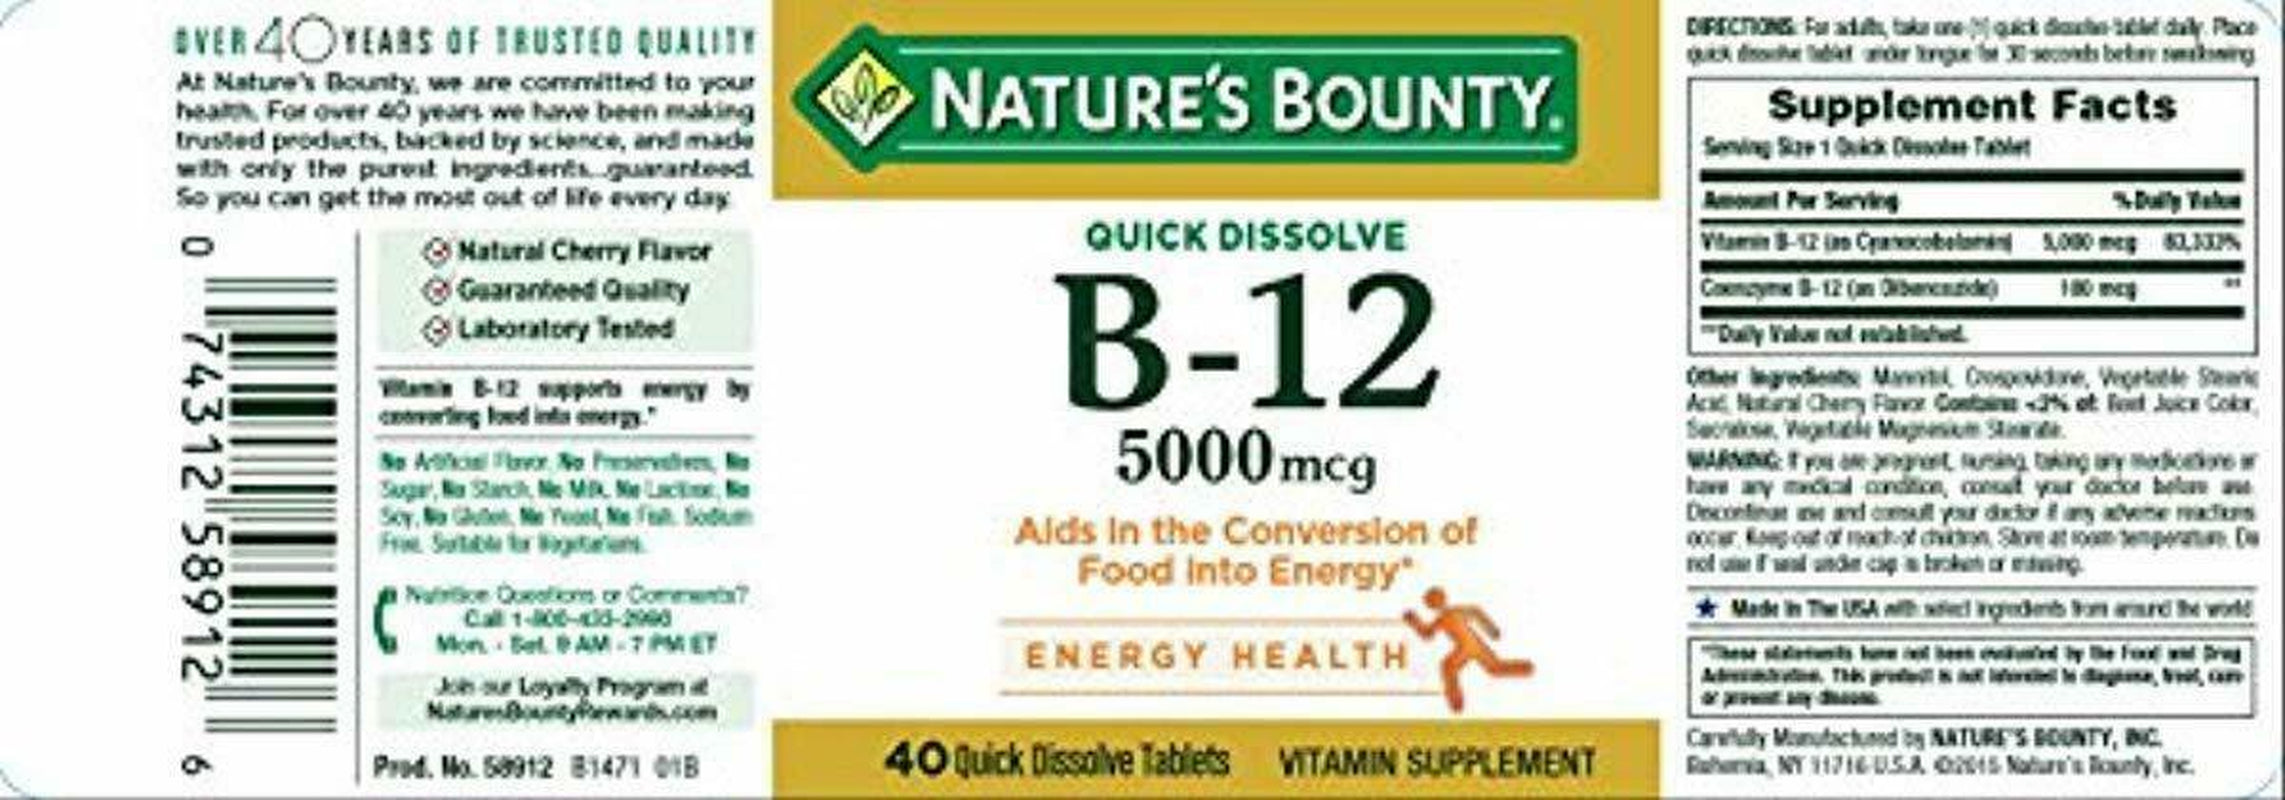 Nature'S Bounty Vitamin B12 5000 Mcg Quick Dissolve Tablets, Natural Cherry 40 Each - (Pack of 4)